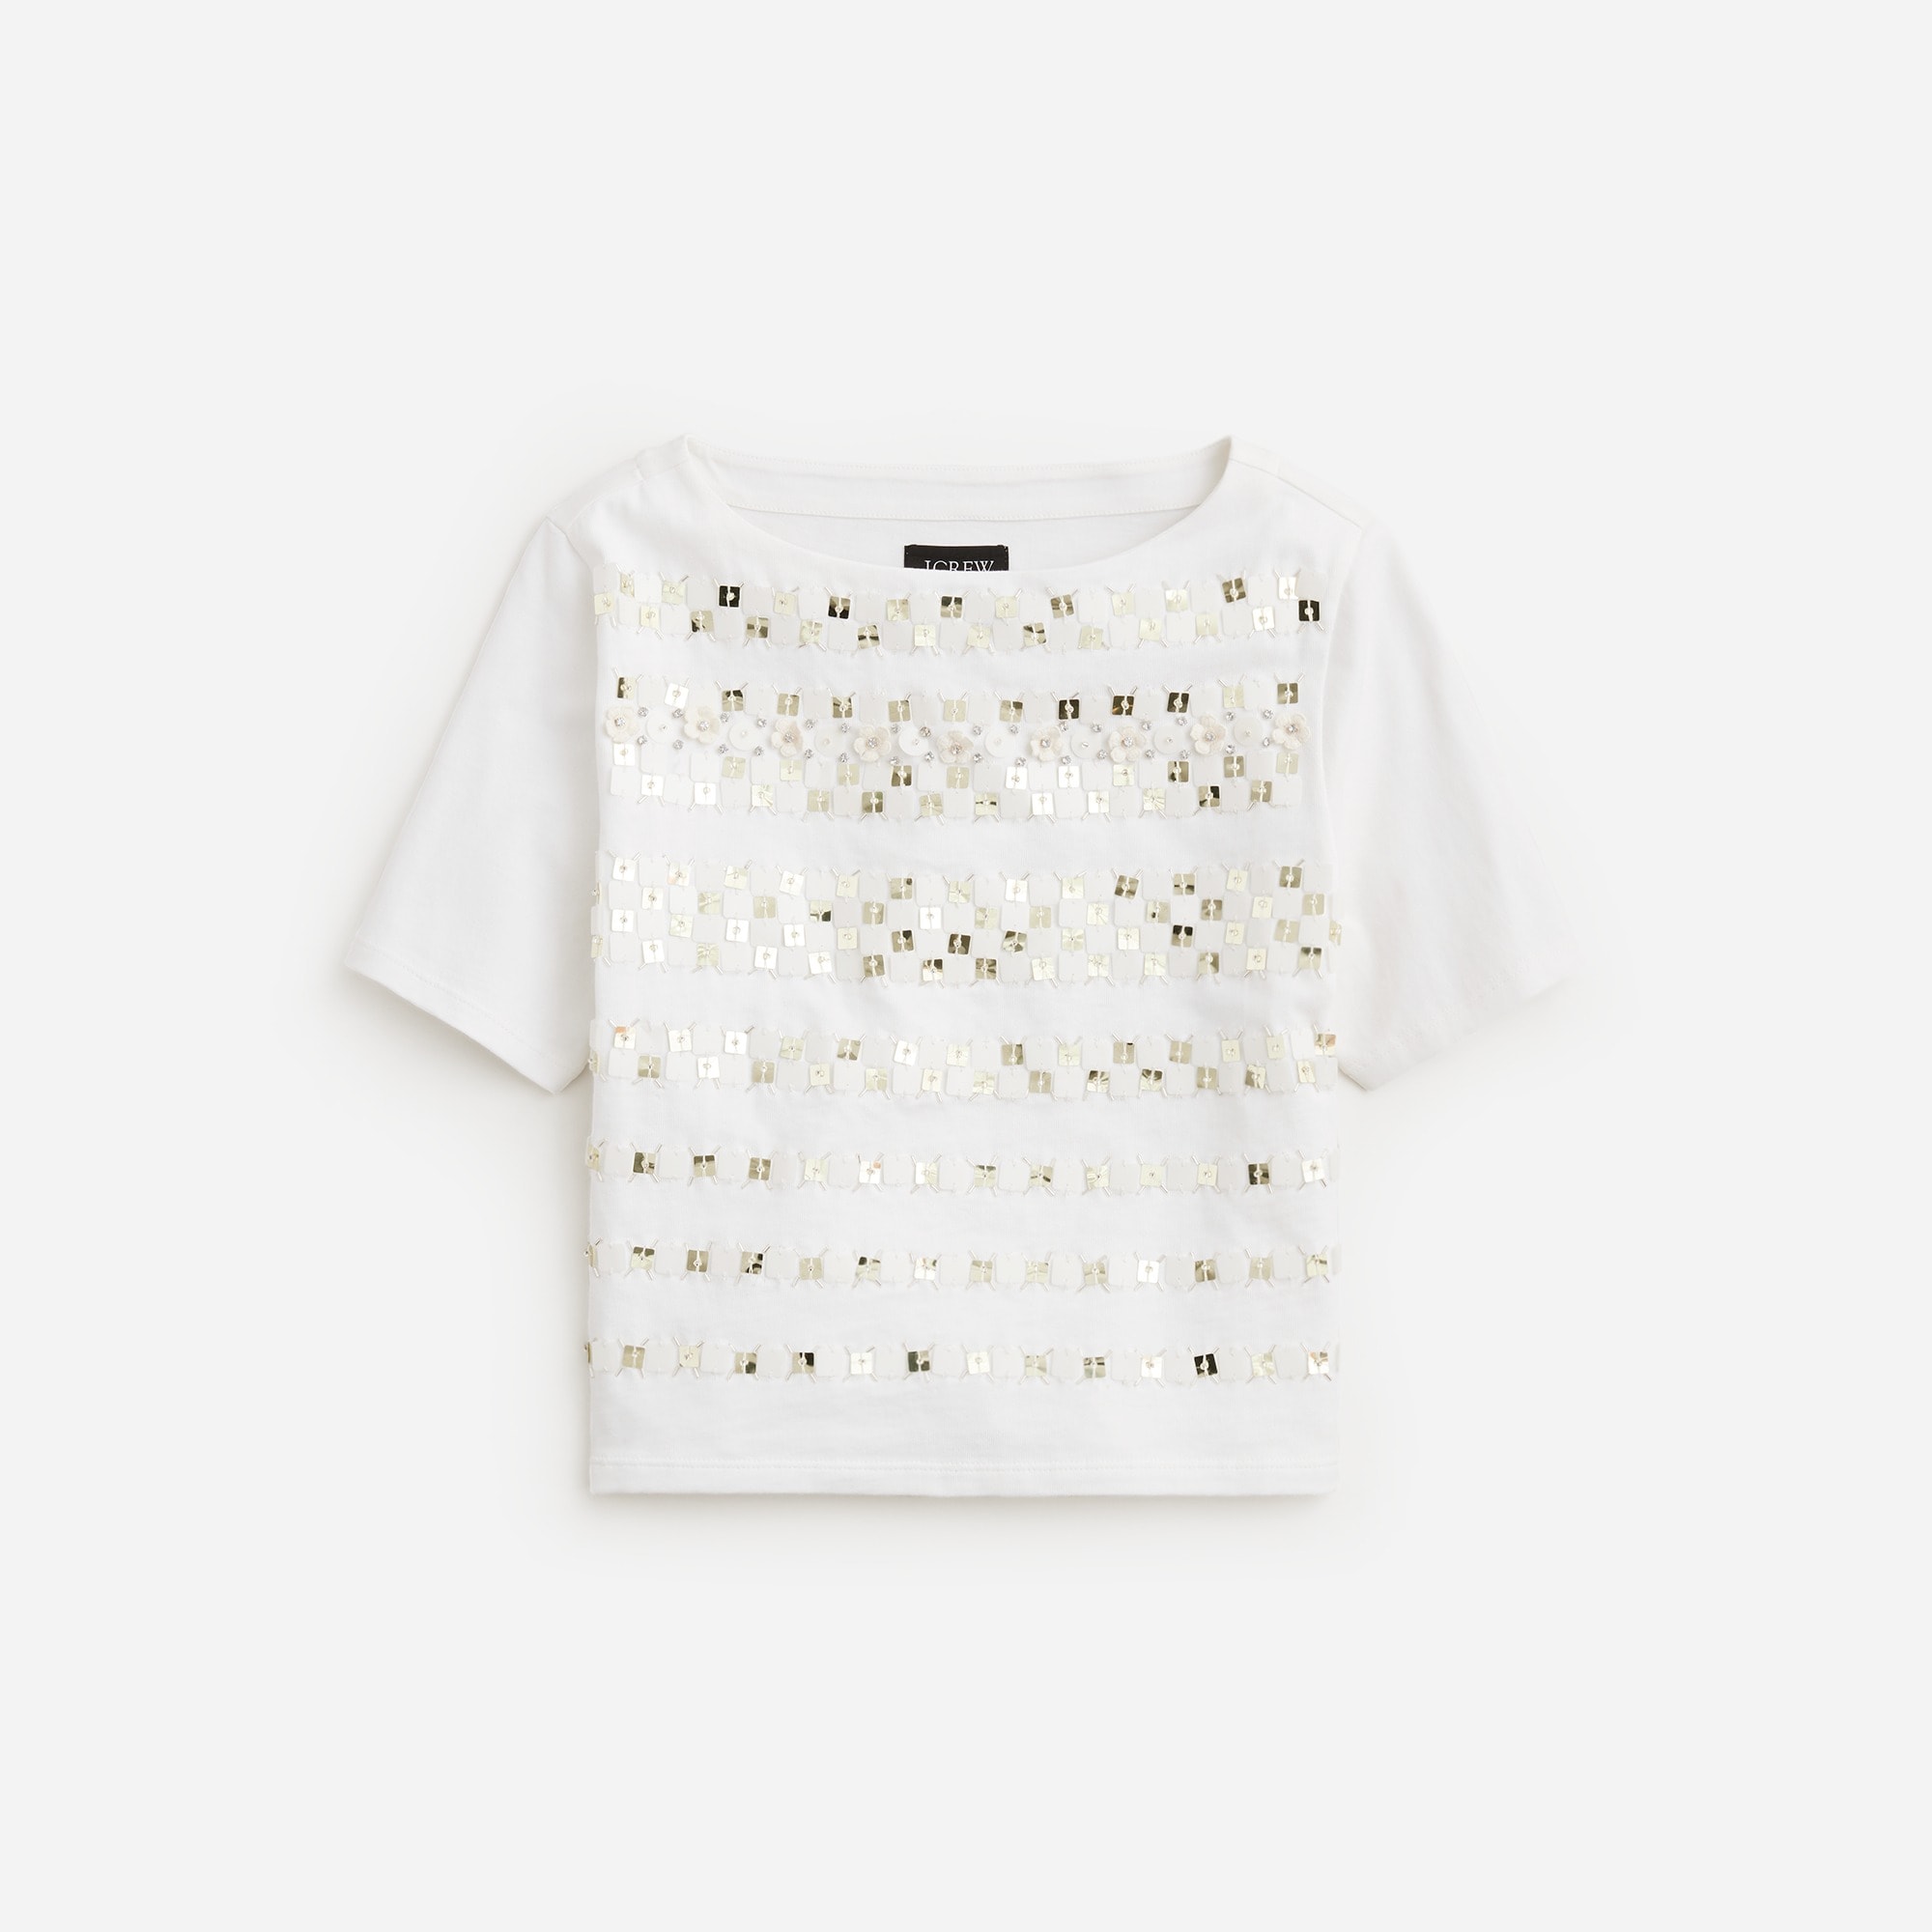 womens Limited-edition embellished T-shirt with floral appliqu&eacute;s